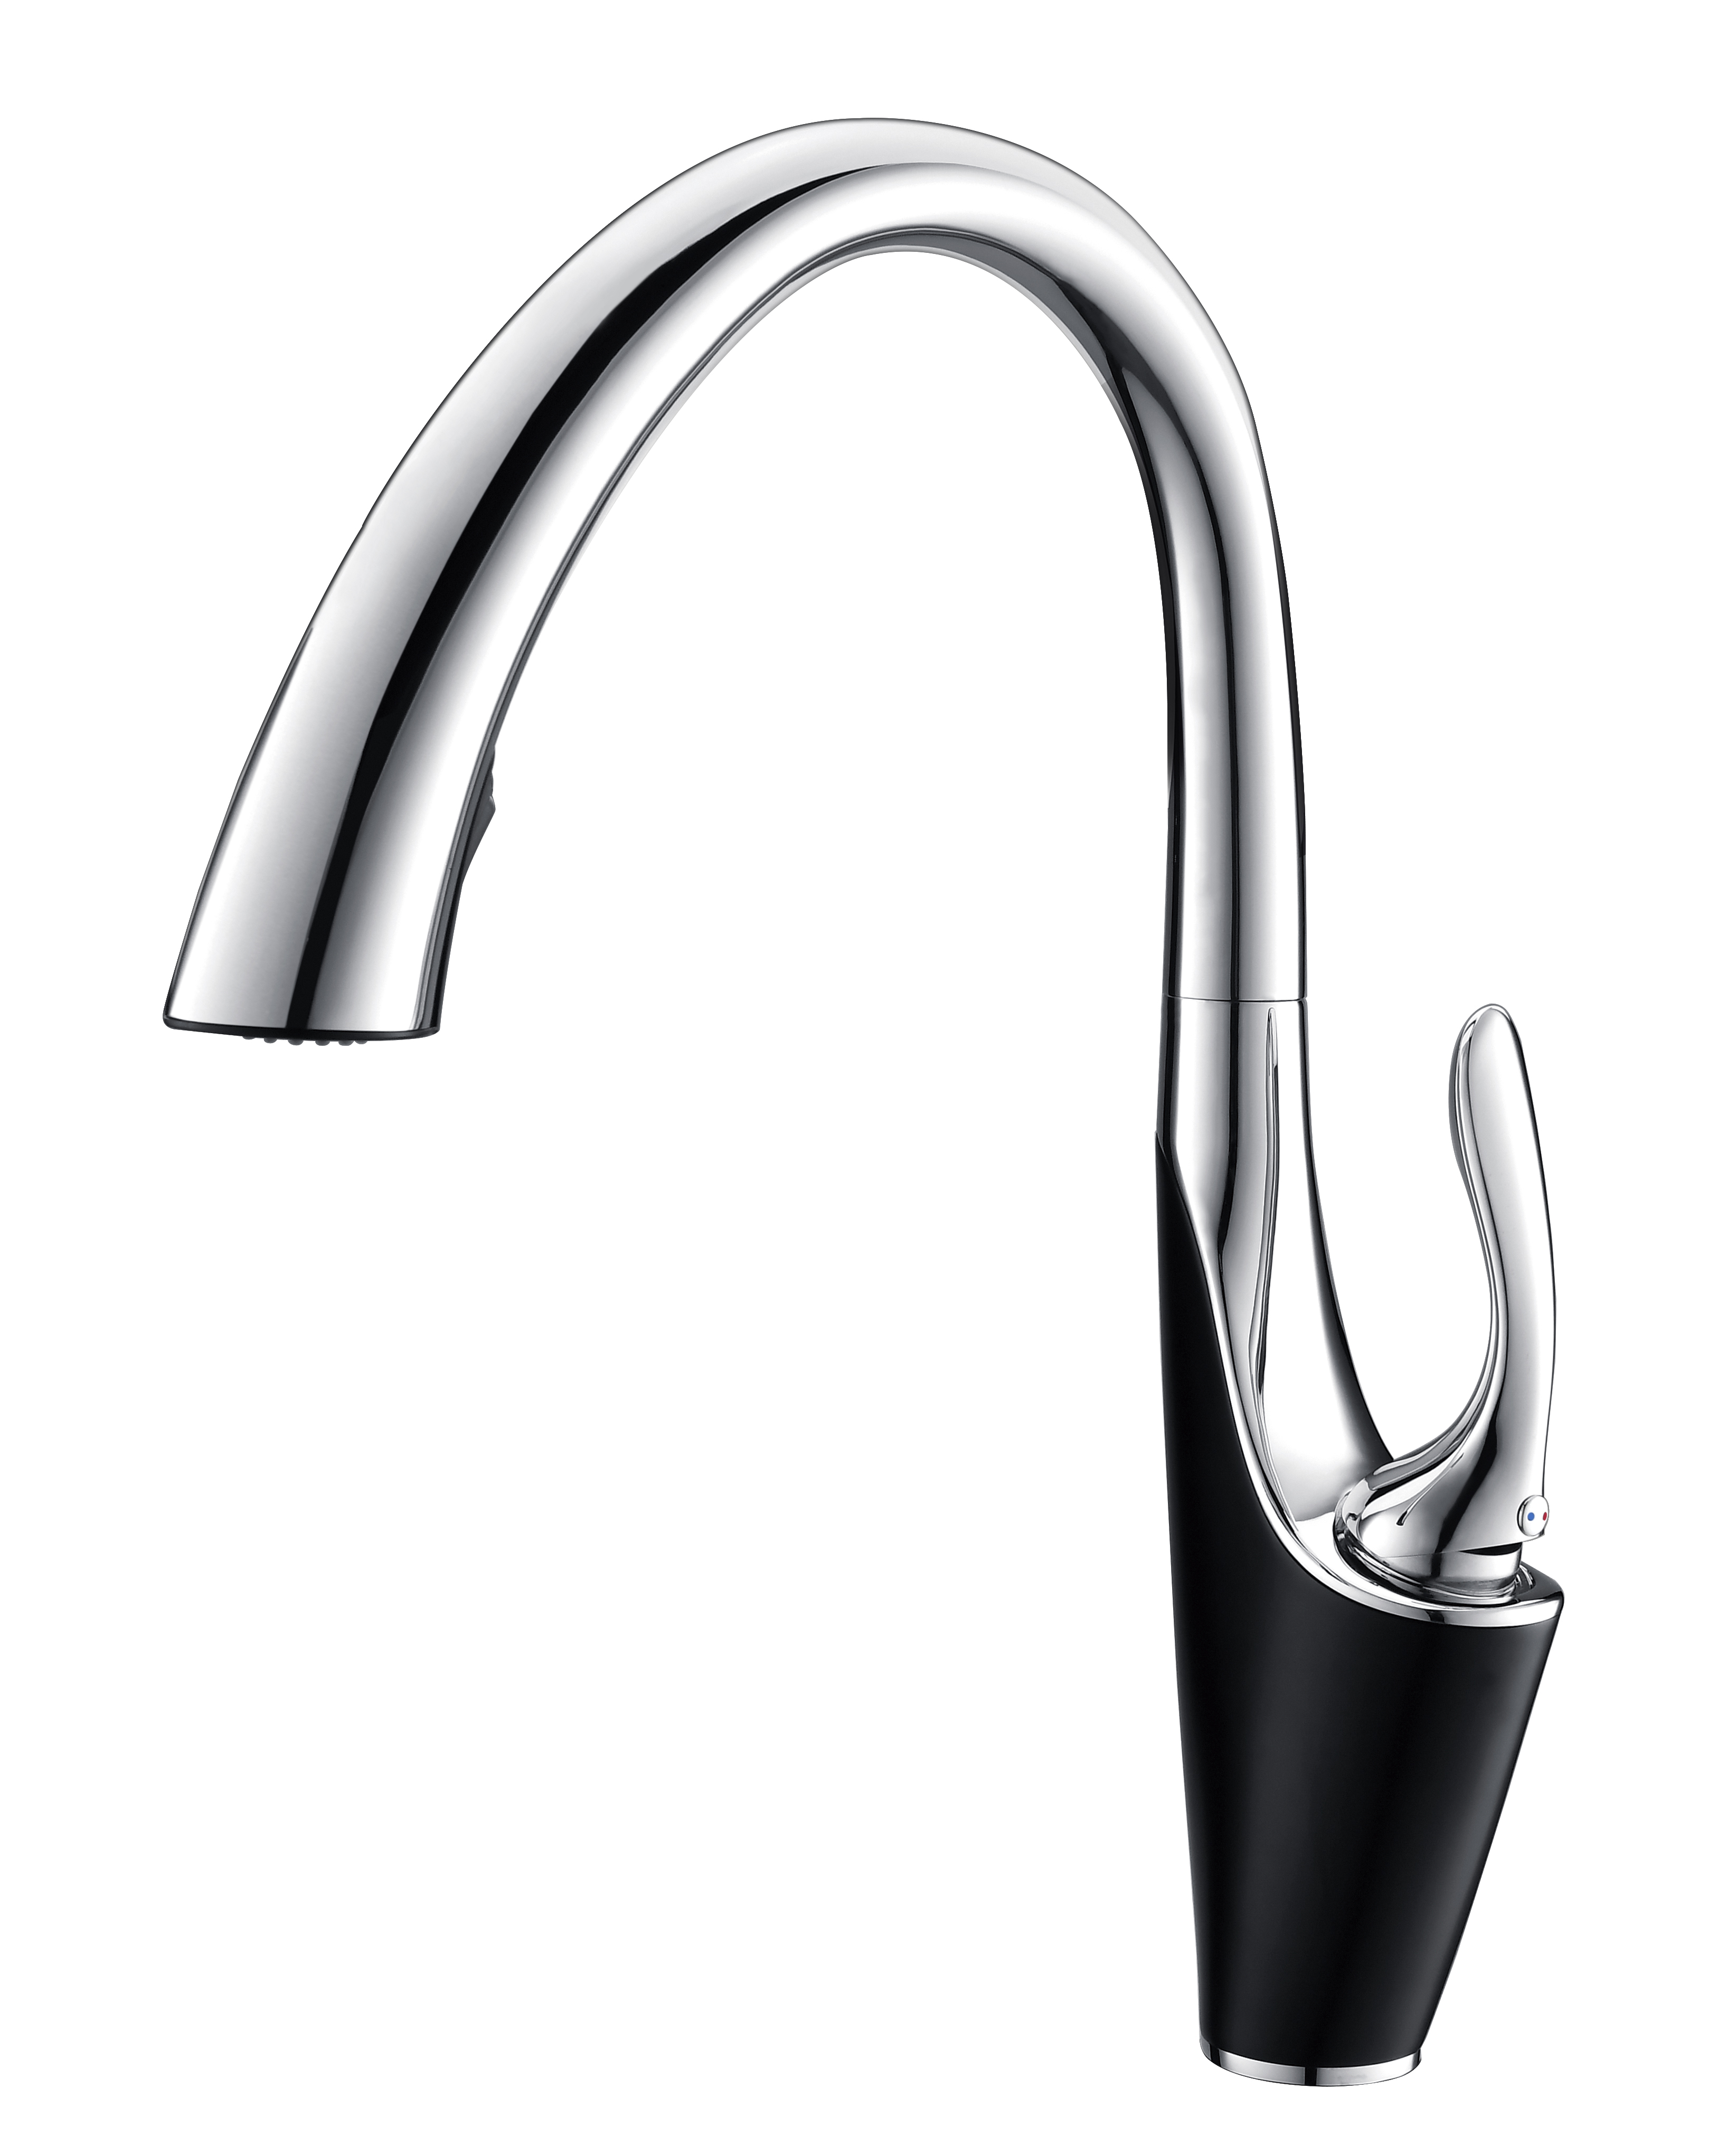 A01 Luxury American Commercial Modern Water Mixer Tap Chrome Zinc Pull Out Kitchen Faucet